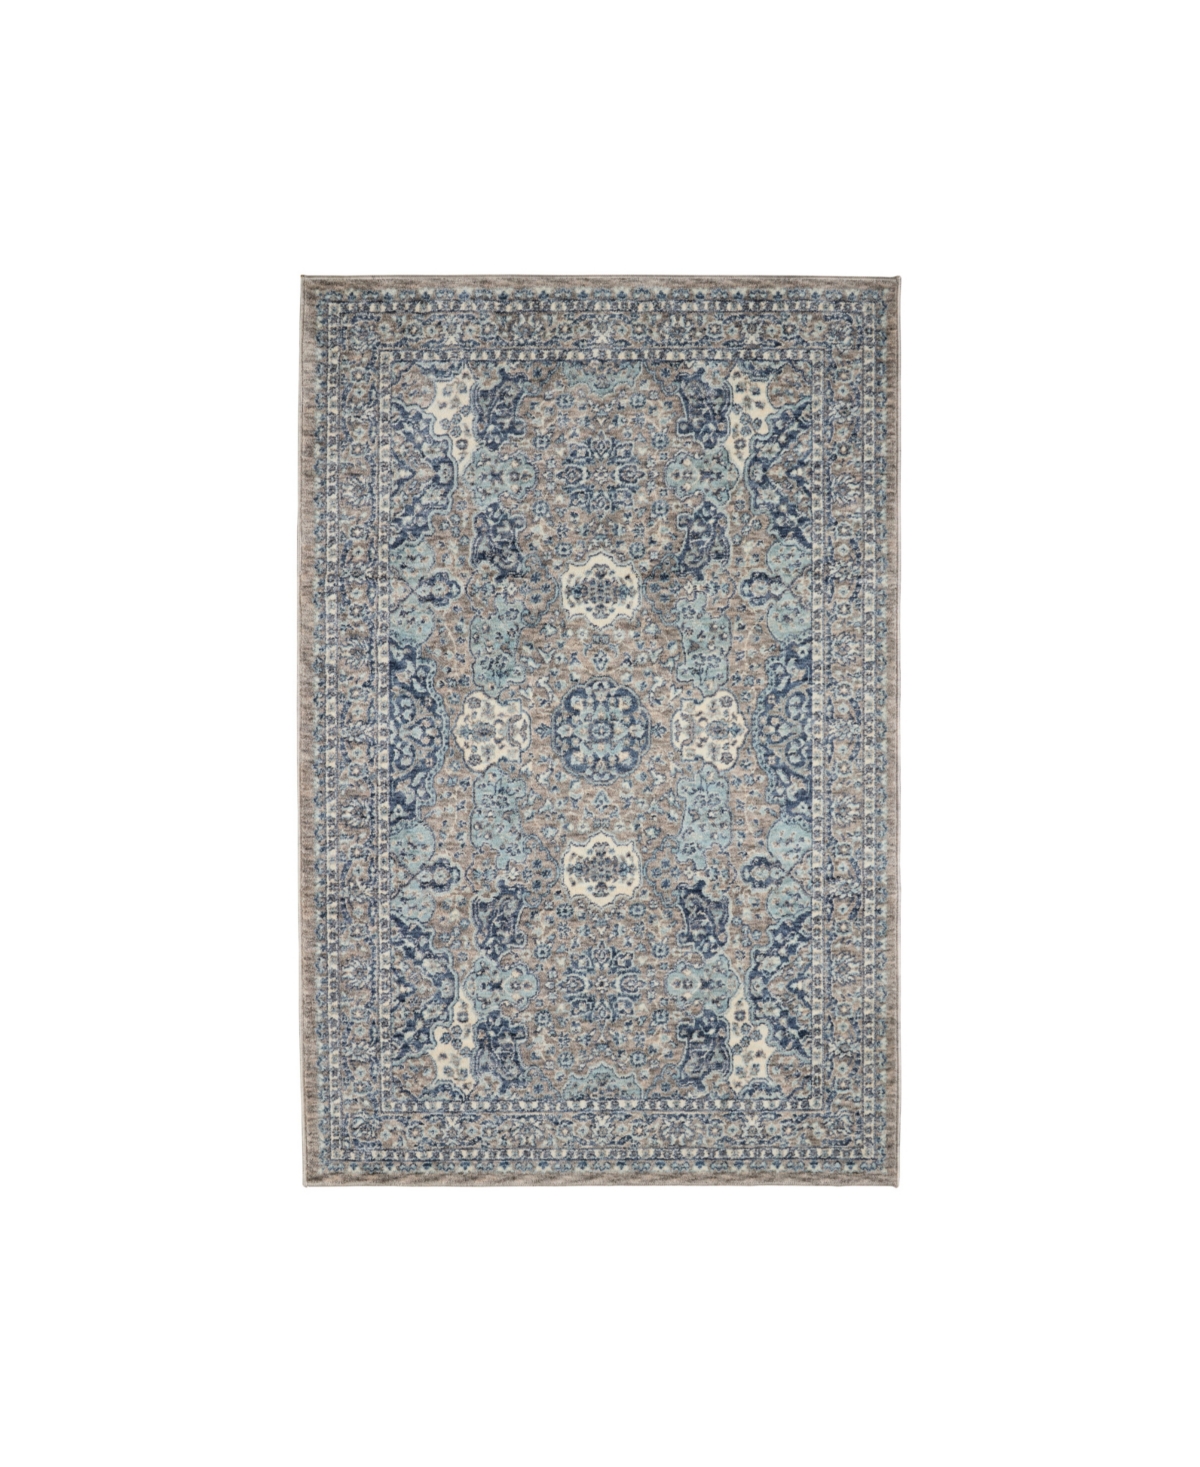 Jahni Turkish Mystic Chenille Accent Rug, 40" x 60" - Red, Blue